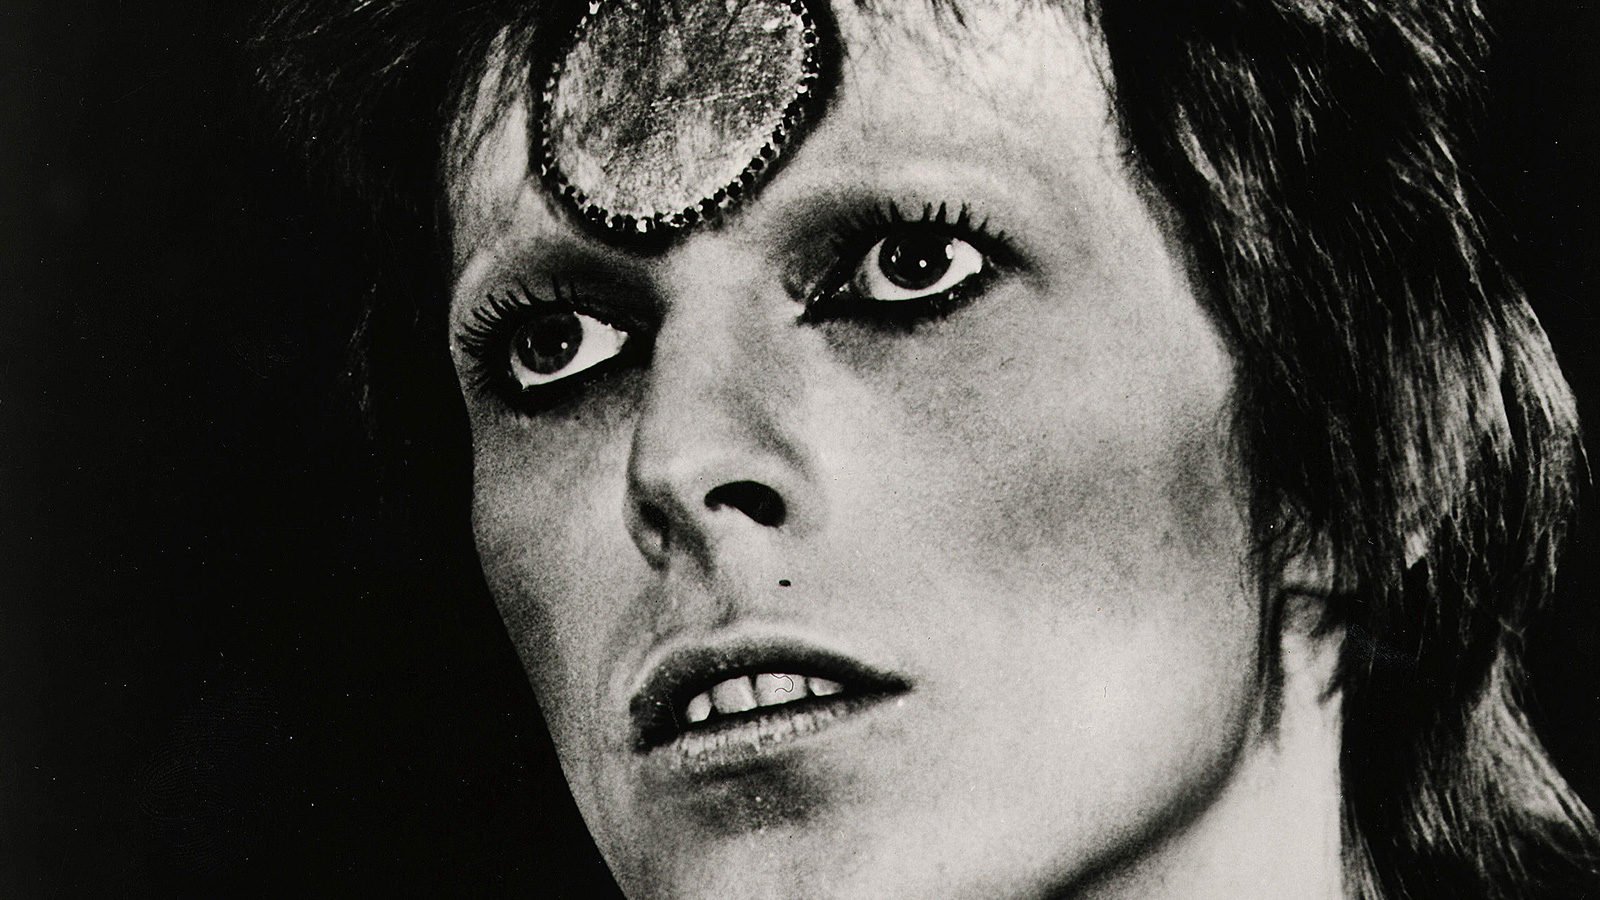 David Bowie returns to the cinema: from 3 to 5 July Ziggy Stardust arrives in a restored version